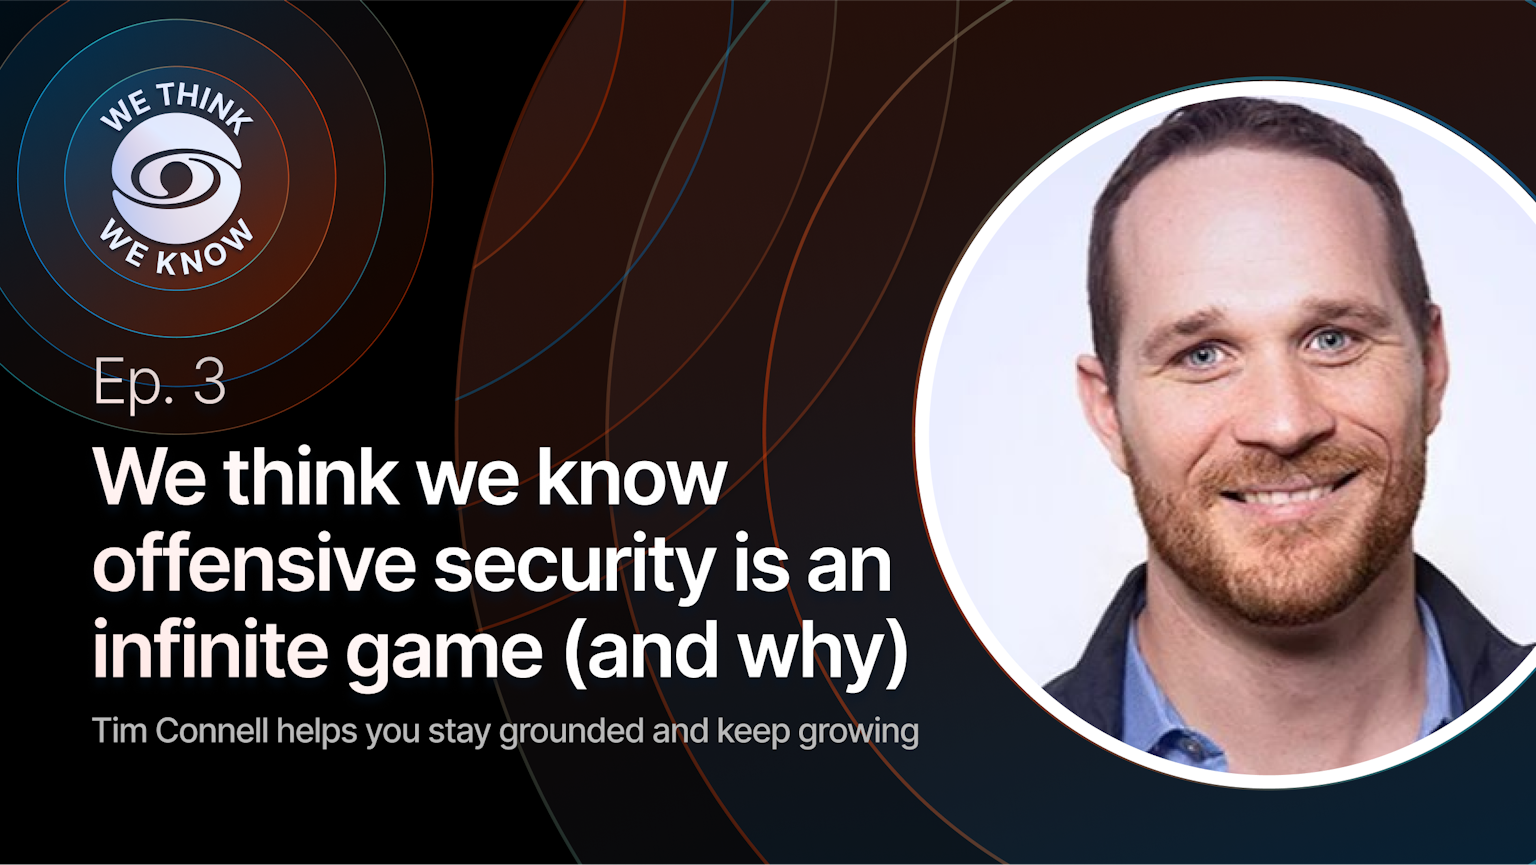 We think we know offensive security is an infinite game (and why)